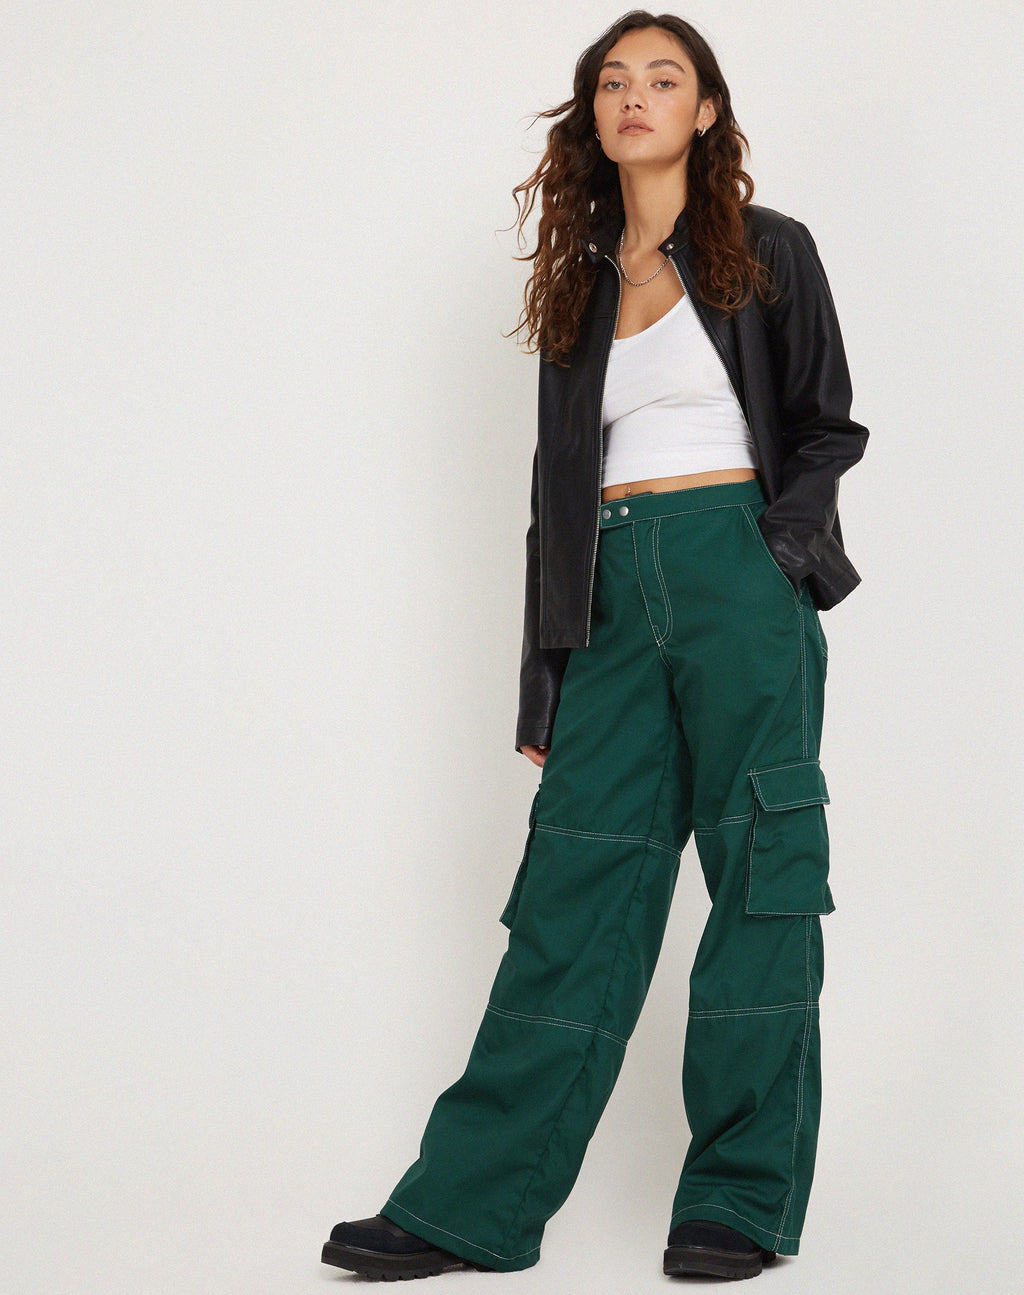 Saul Wide Leg Cargo Trouser in Bottle Green with White Stitching